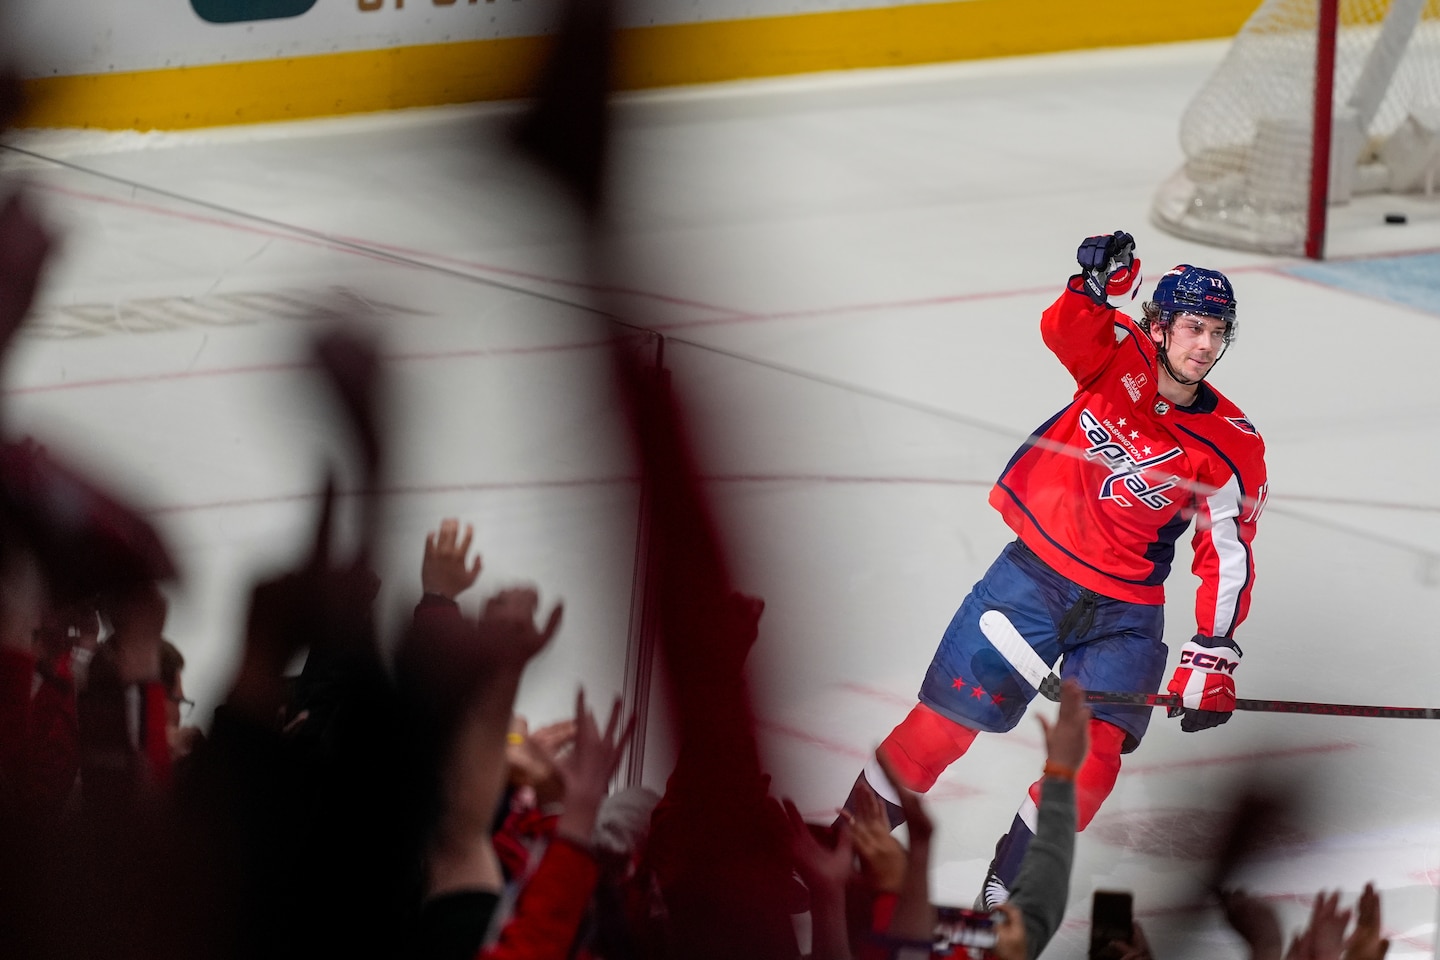 As the Capitals push for the playoffs, Dylan Strome is leveling up